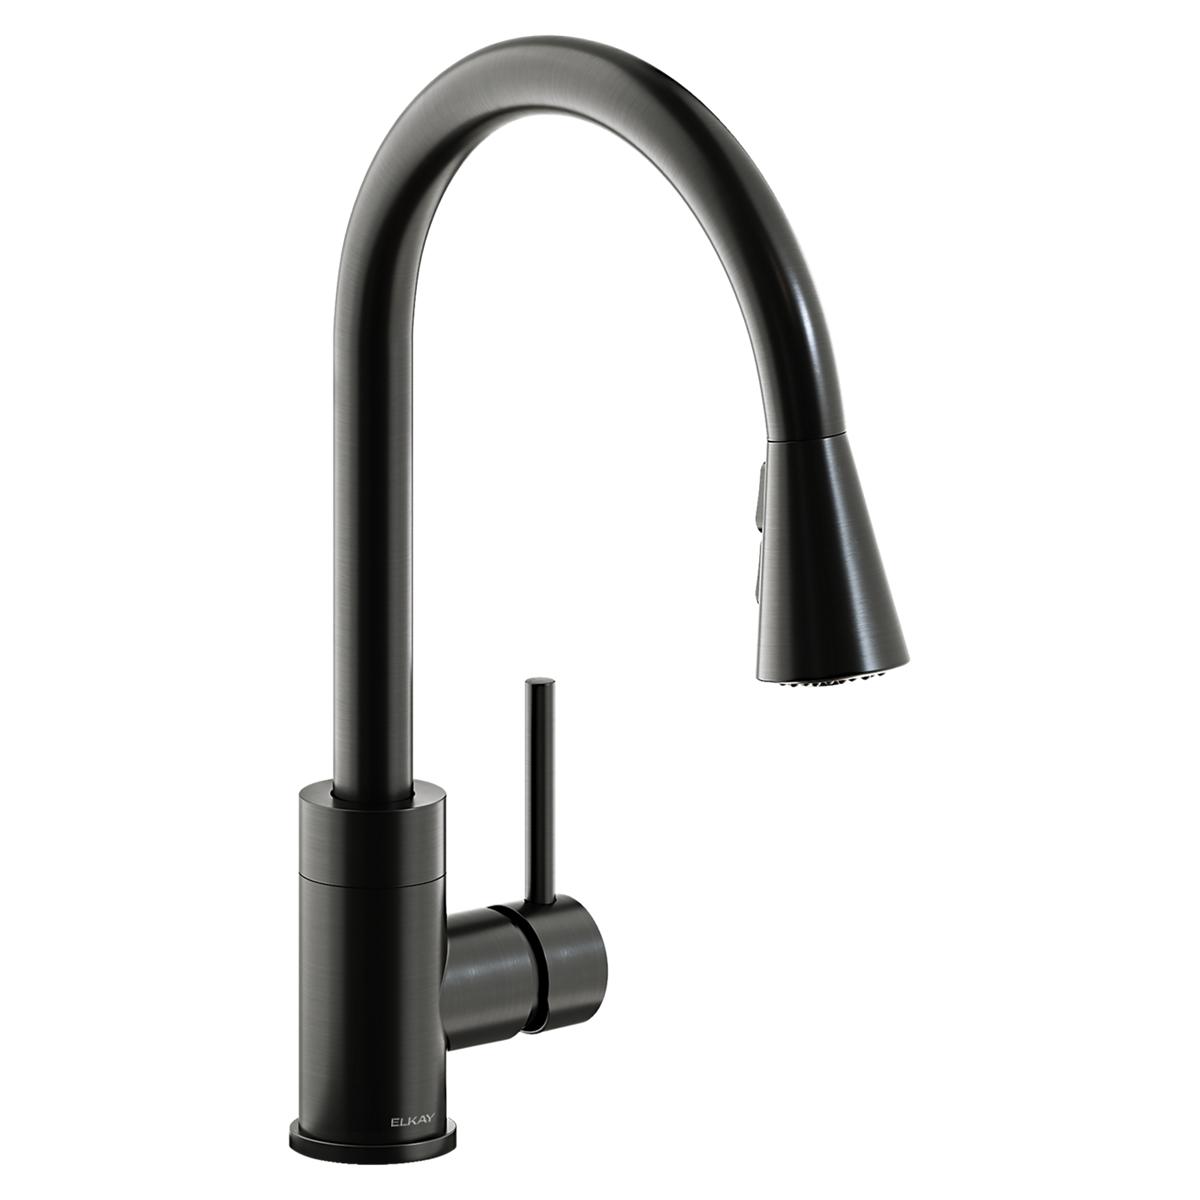 Elkay Avado Single Hole Kitchen Faucet with Pull-down Spray and Forward Only Lever Handle